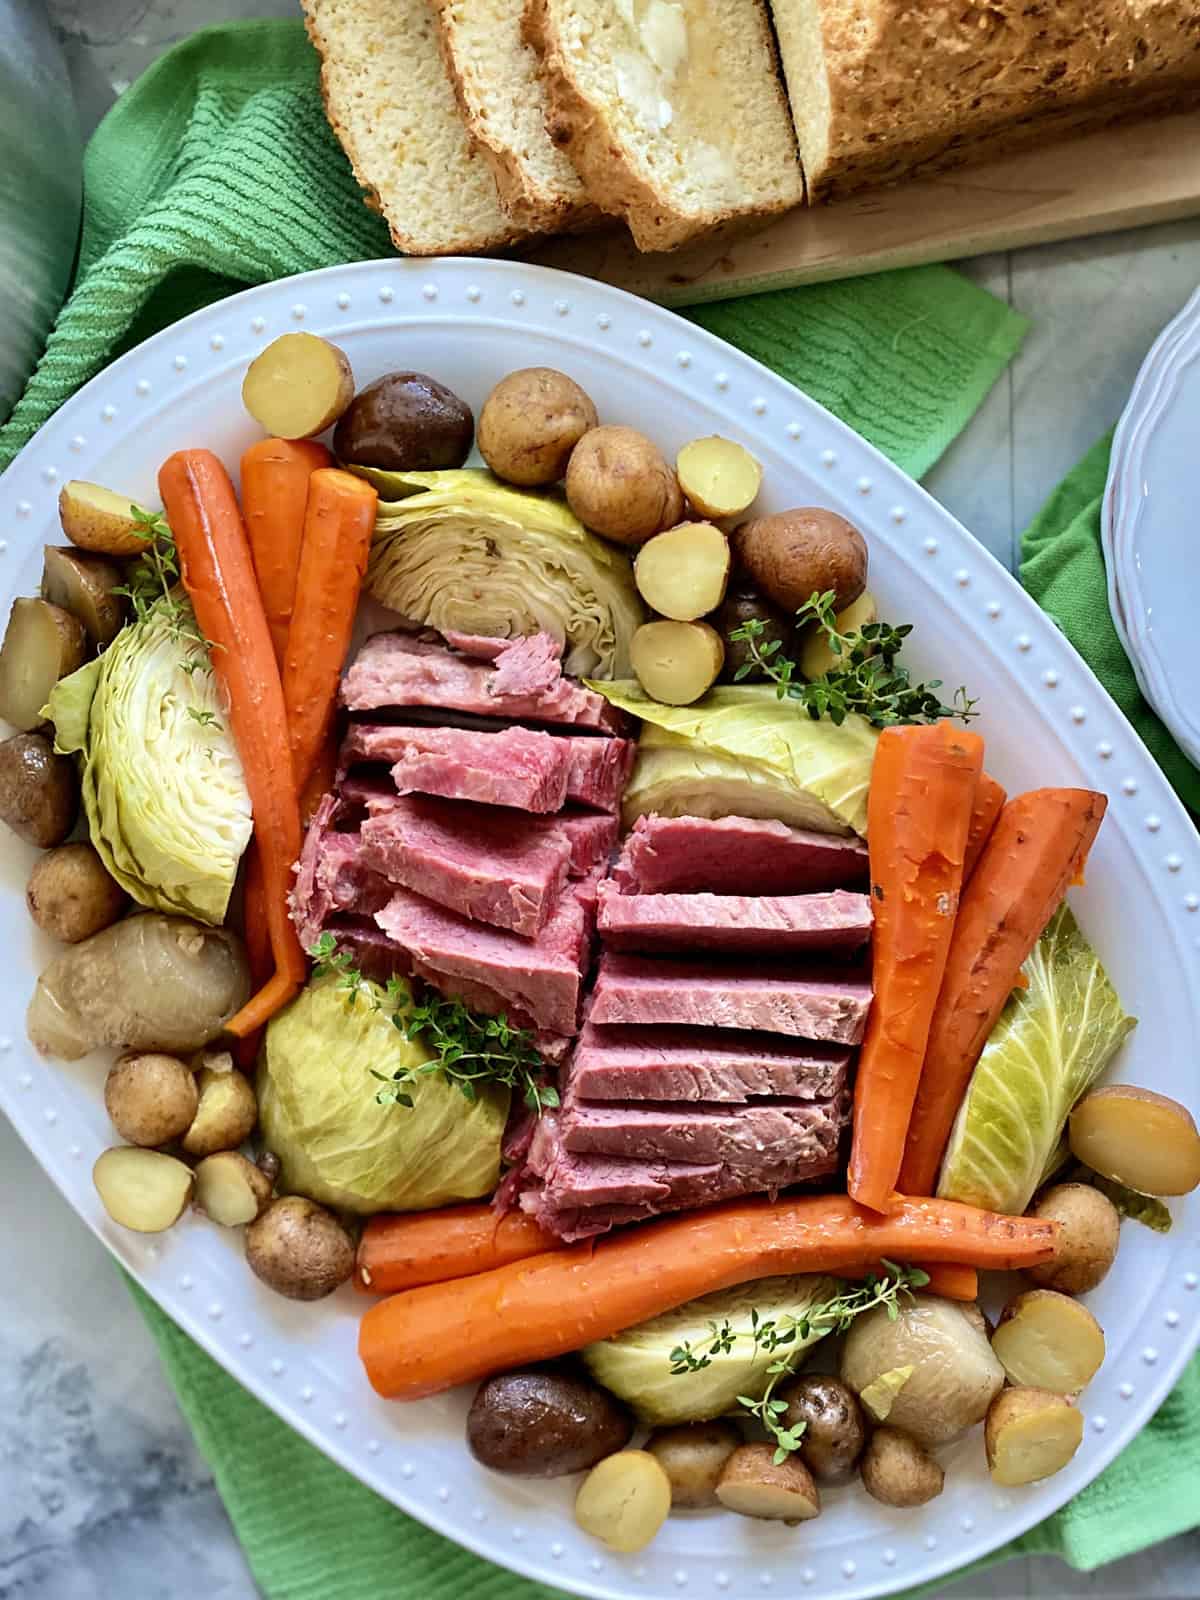 Top view of a white platter filled with beef, carrots, potatoes, and cabbage.